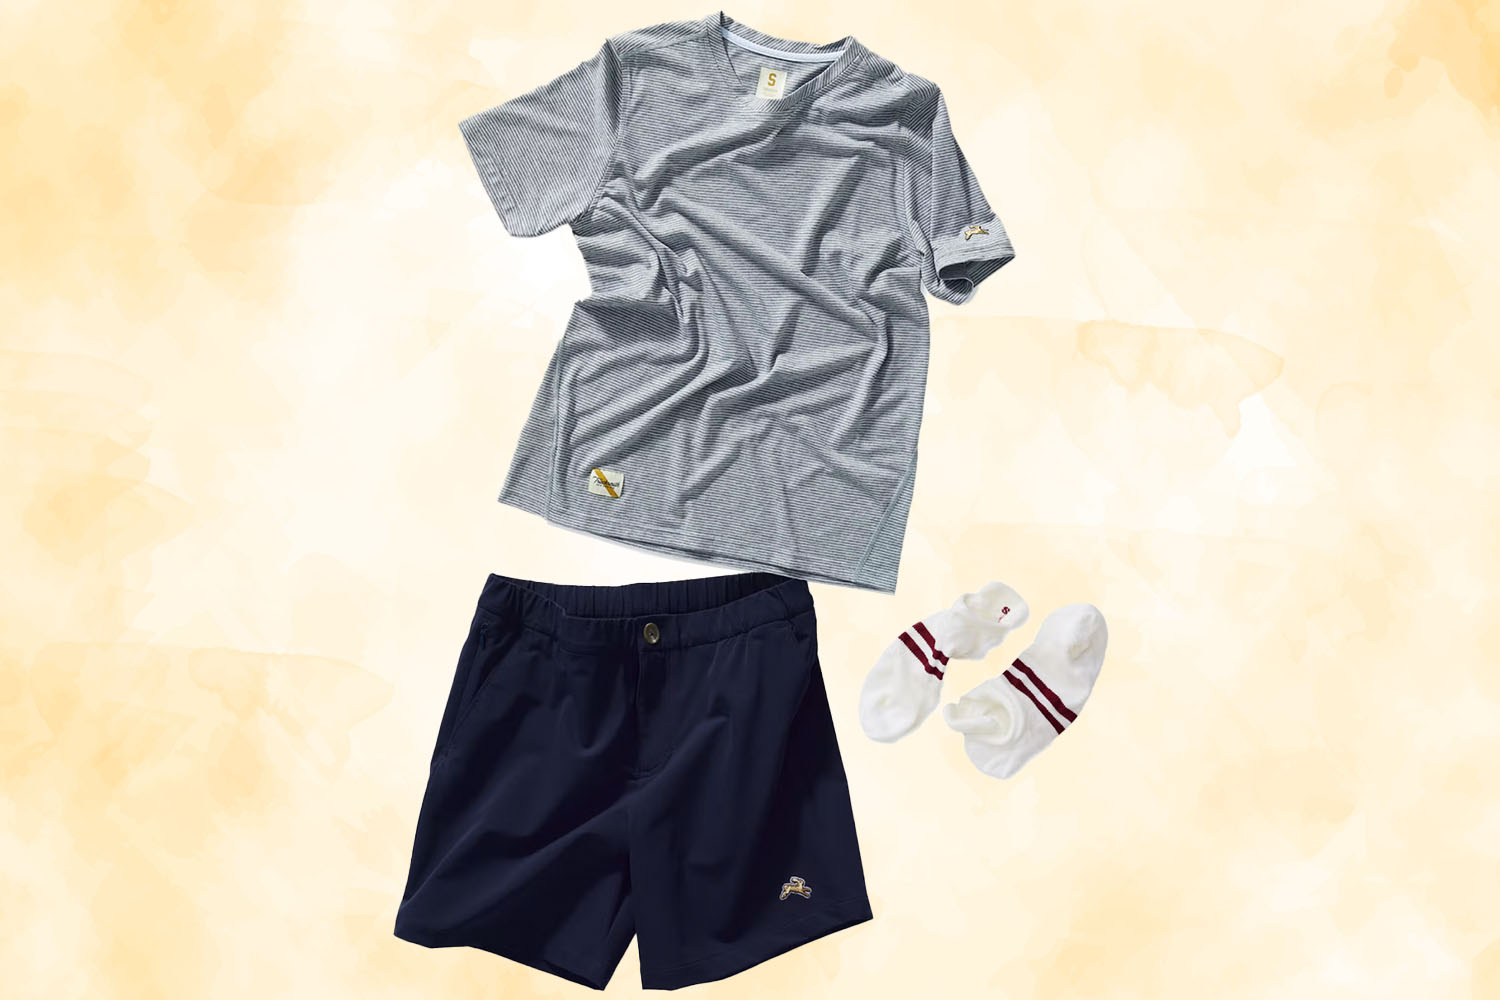 an Easy Going kit with a grey tee, navy shorts and socks from Tracksmith on a gold textured background